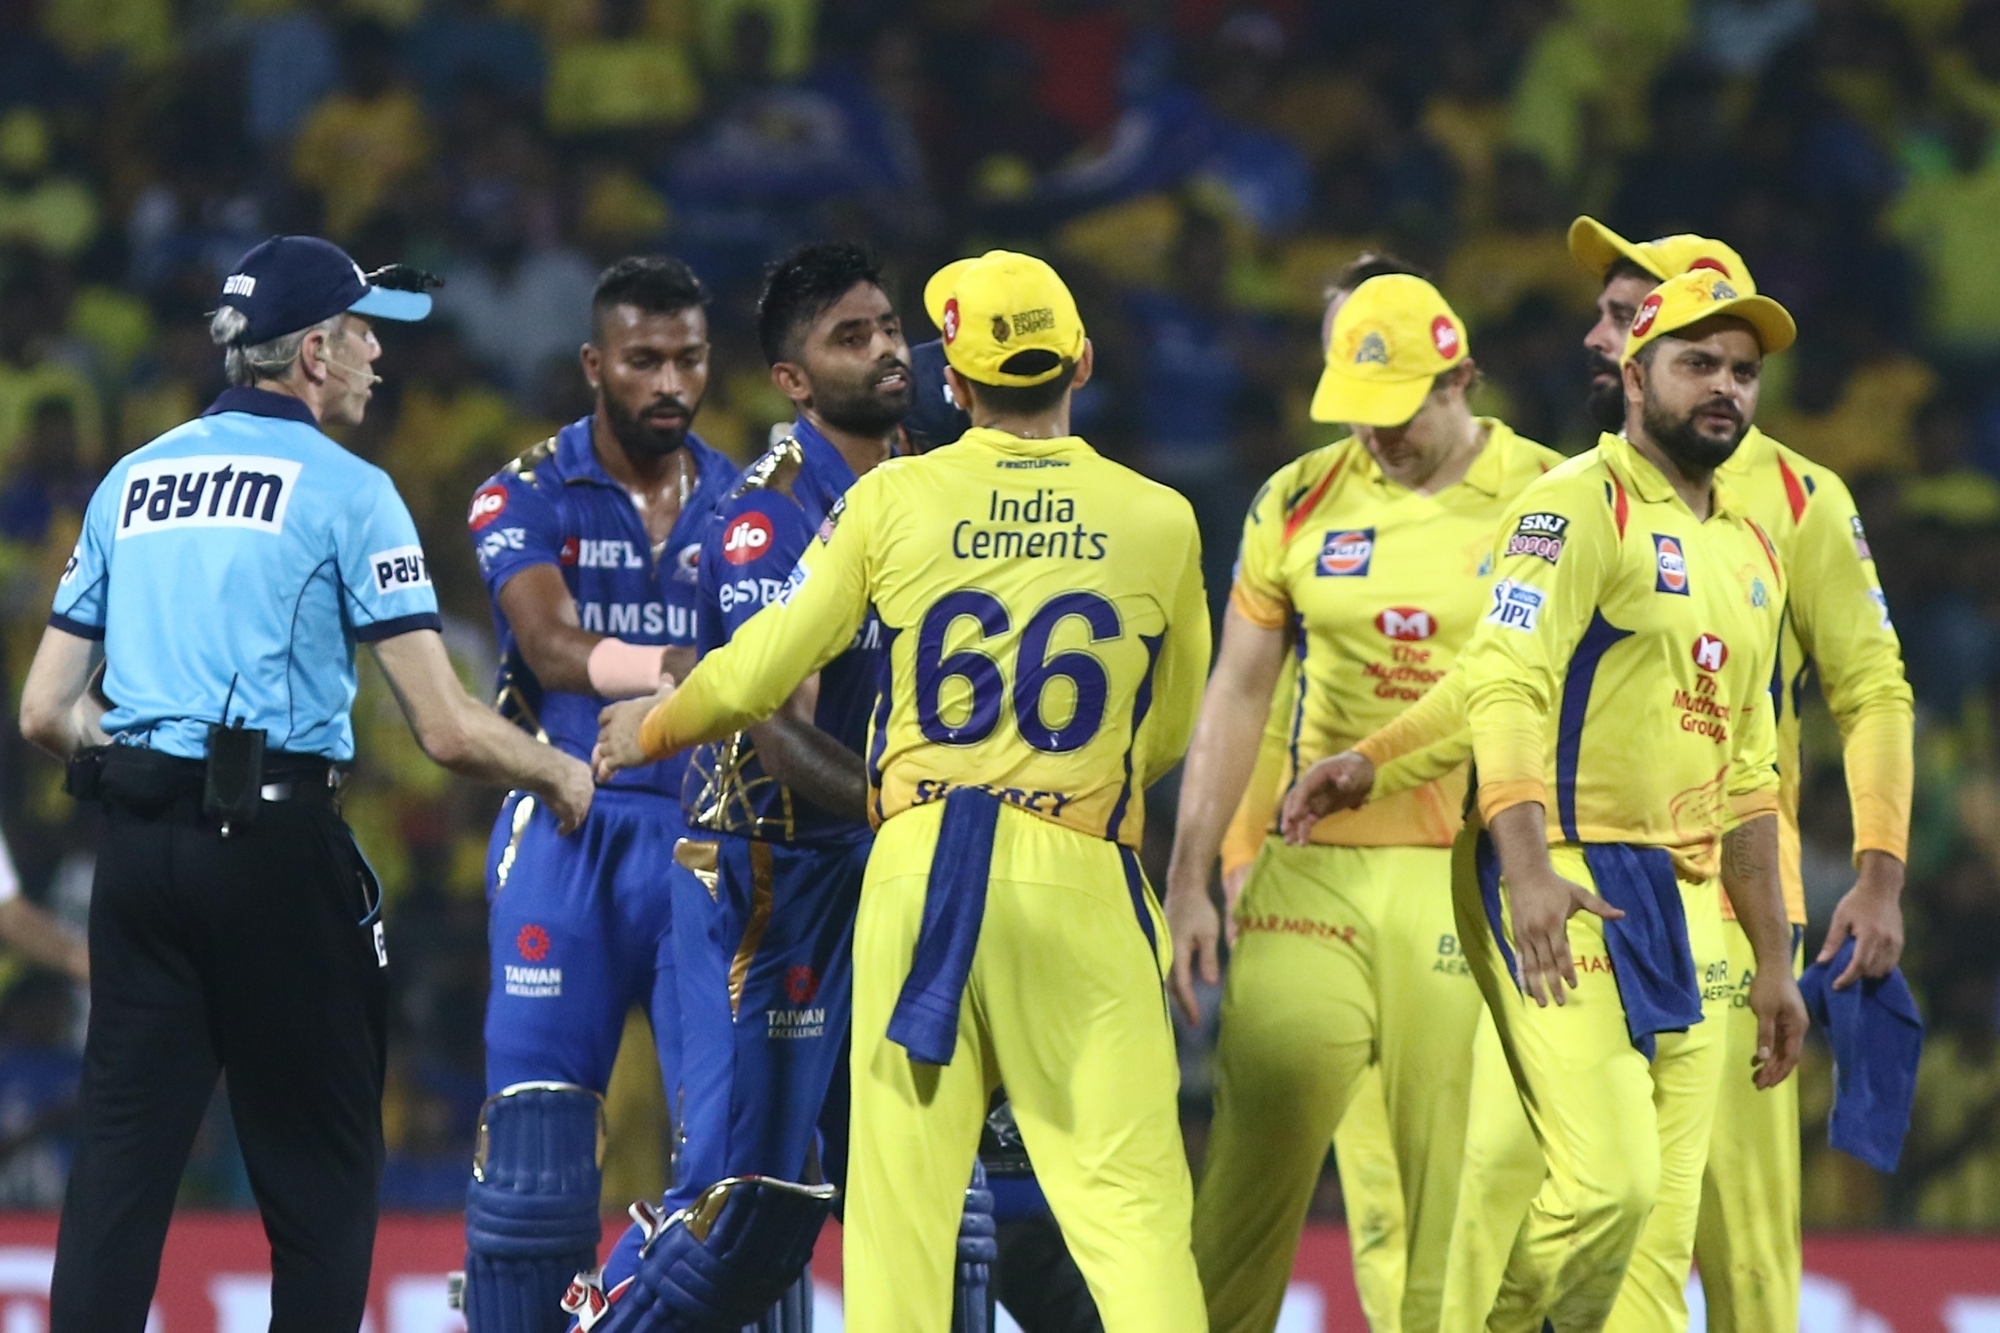 IPL 2020 remains postponed due to COVID-19 pandemic | Getty